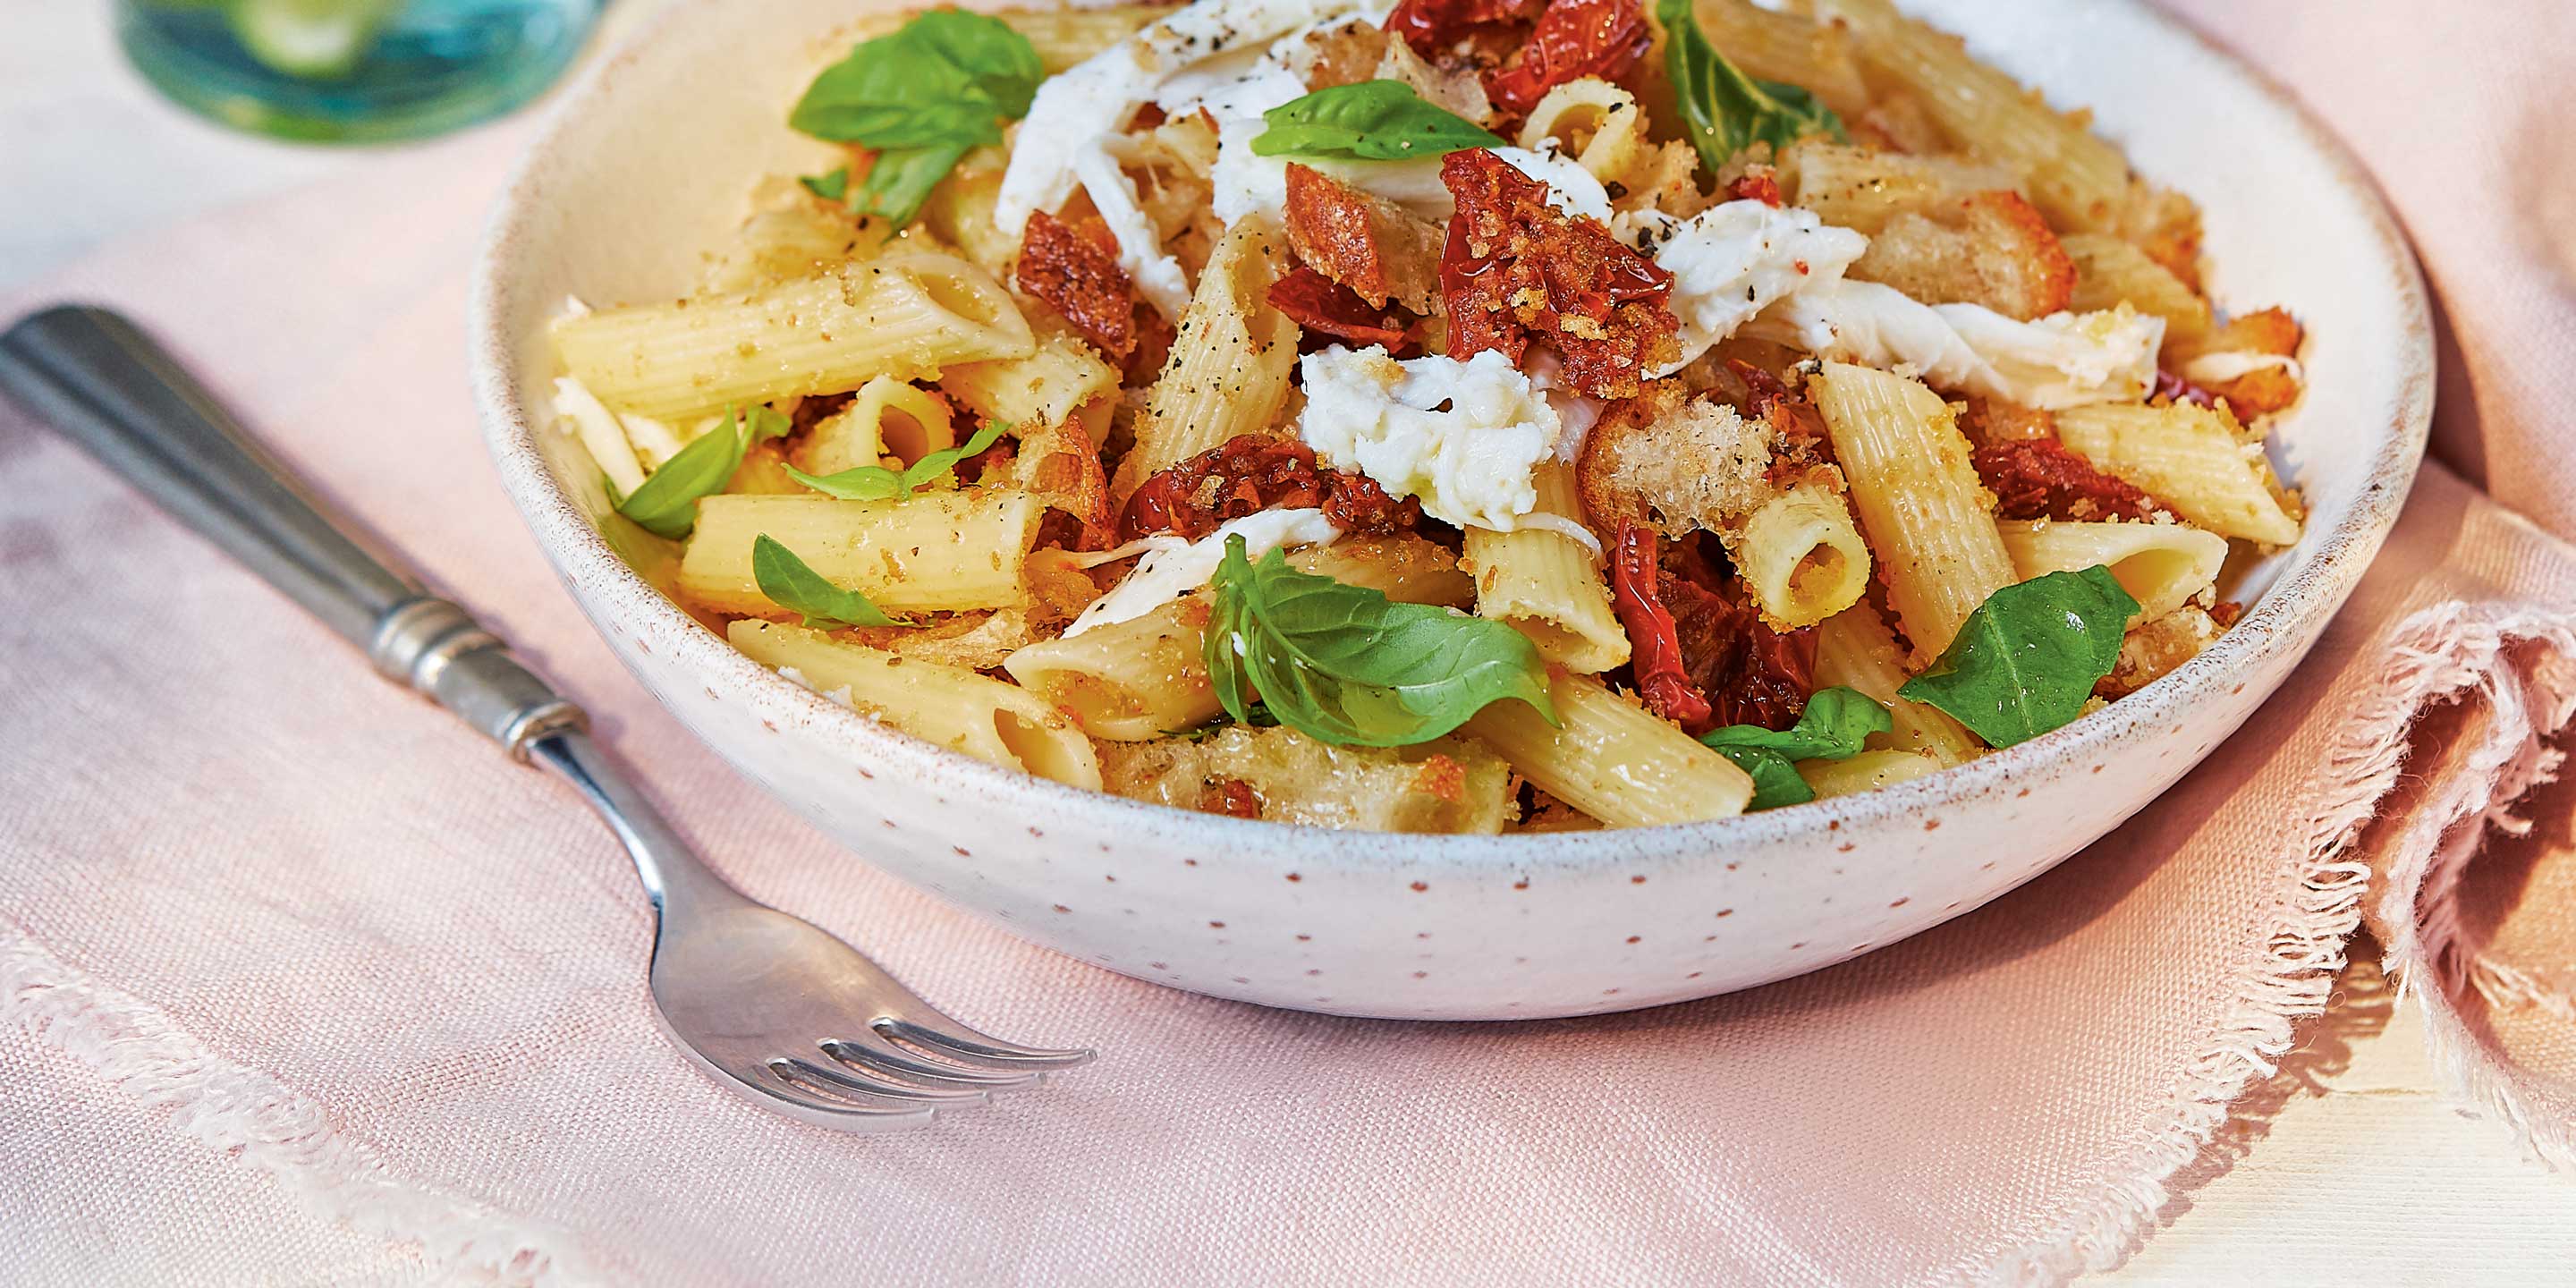 Pasta with sun-dried tomatoes and mozzarella — Co-op